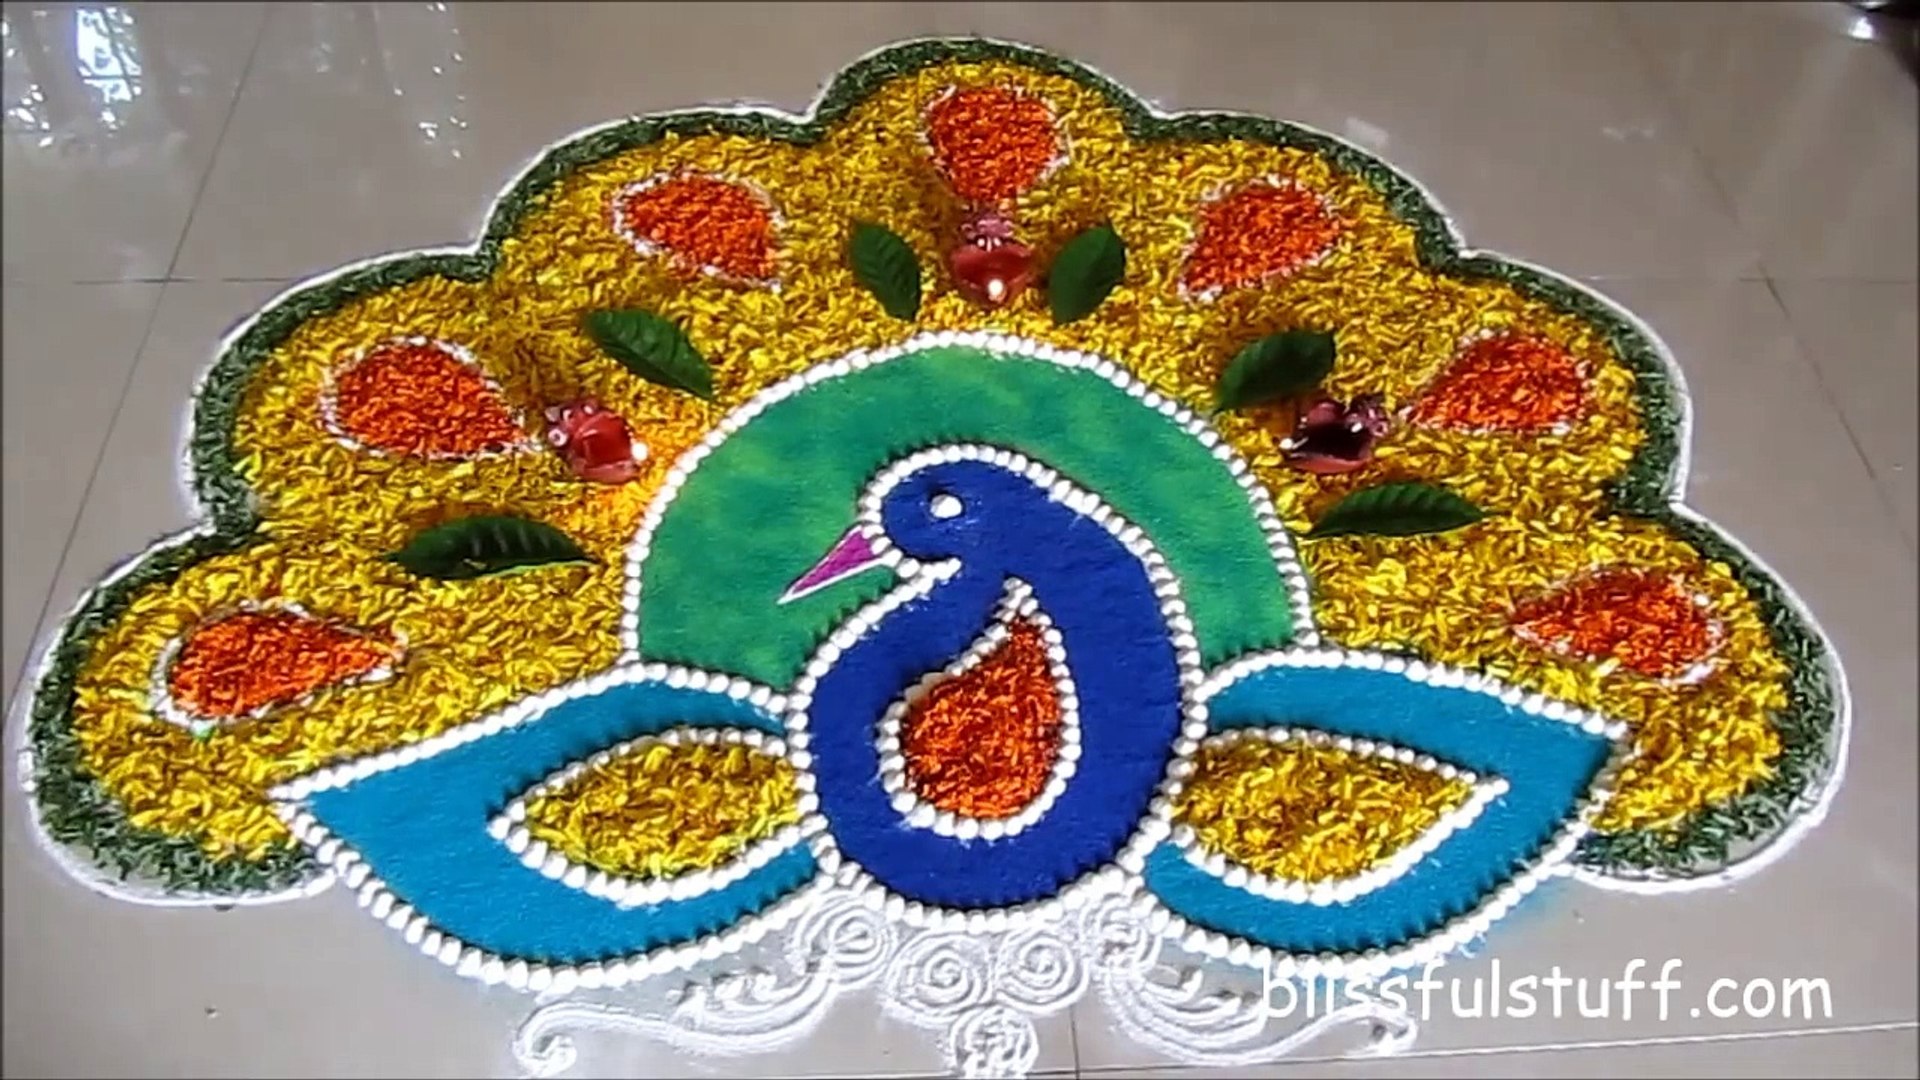 Diwali Special Peacock Rangoli Design With Marigold Flowers How To Make Rangoli With Flowers Video Dailymotion,Creative Clipart Flower Design Black And White